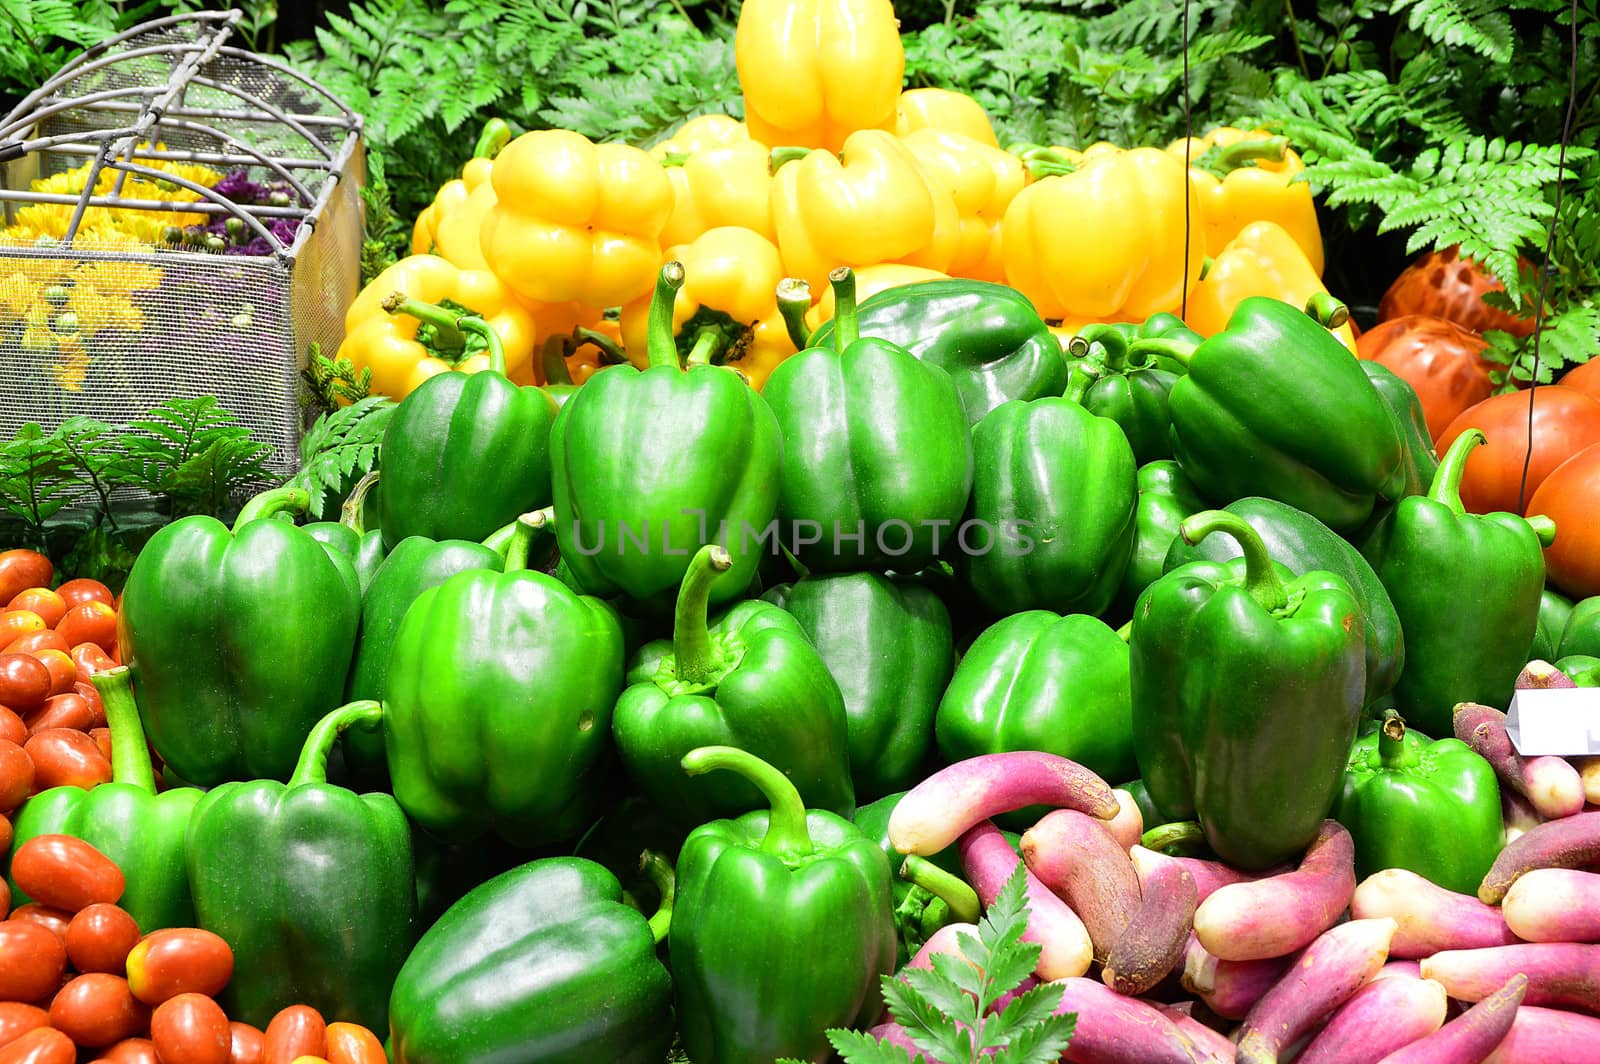 Ripe Yellow and Green Peppers in Vegetables Market by Lekchangply